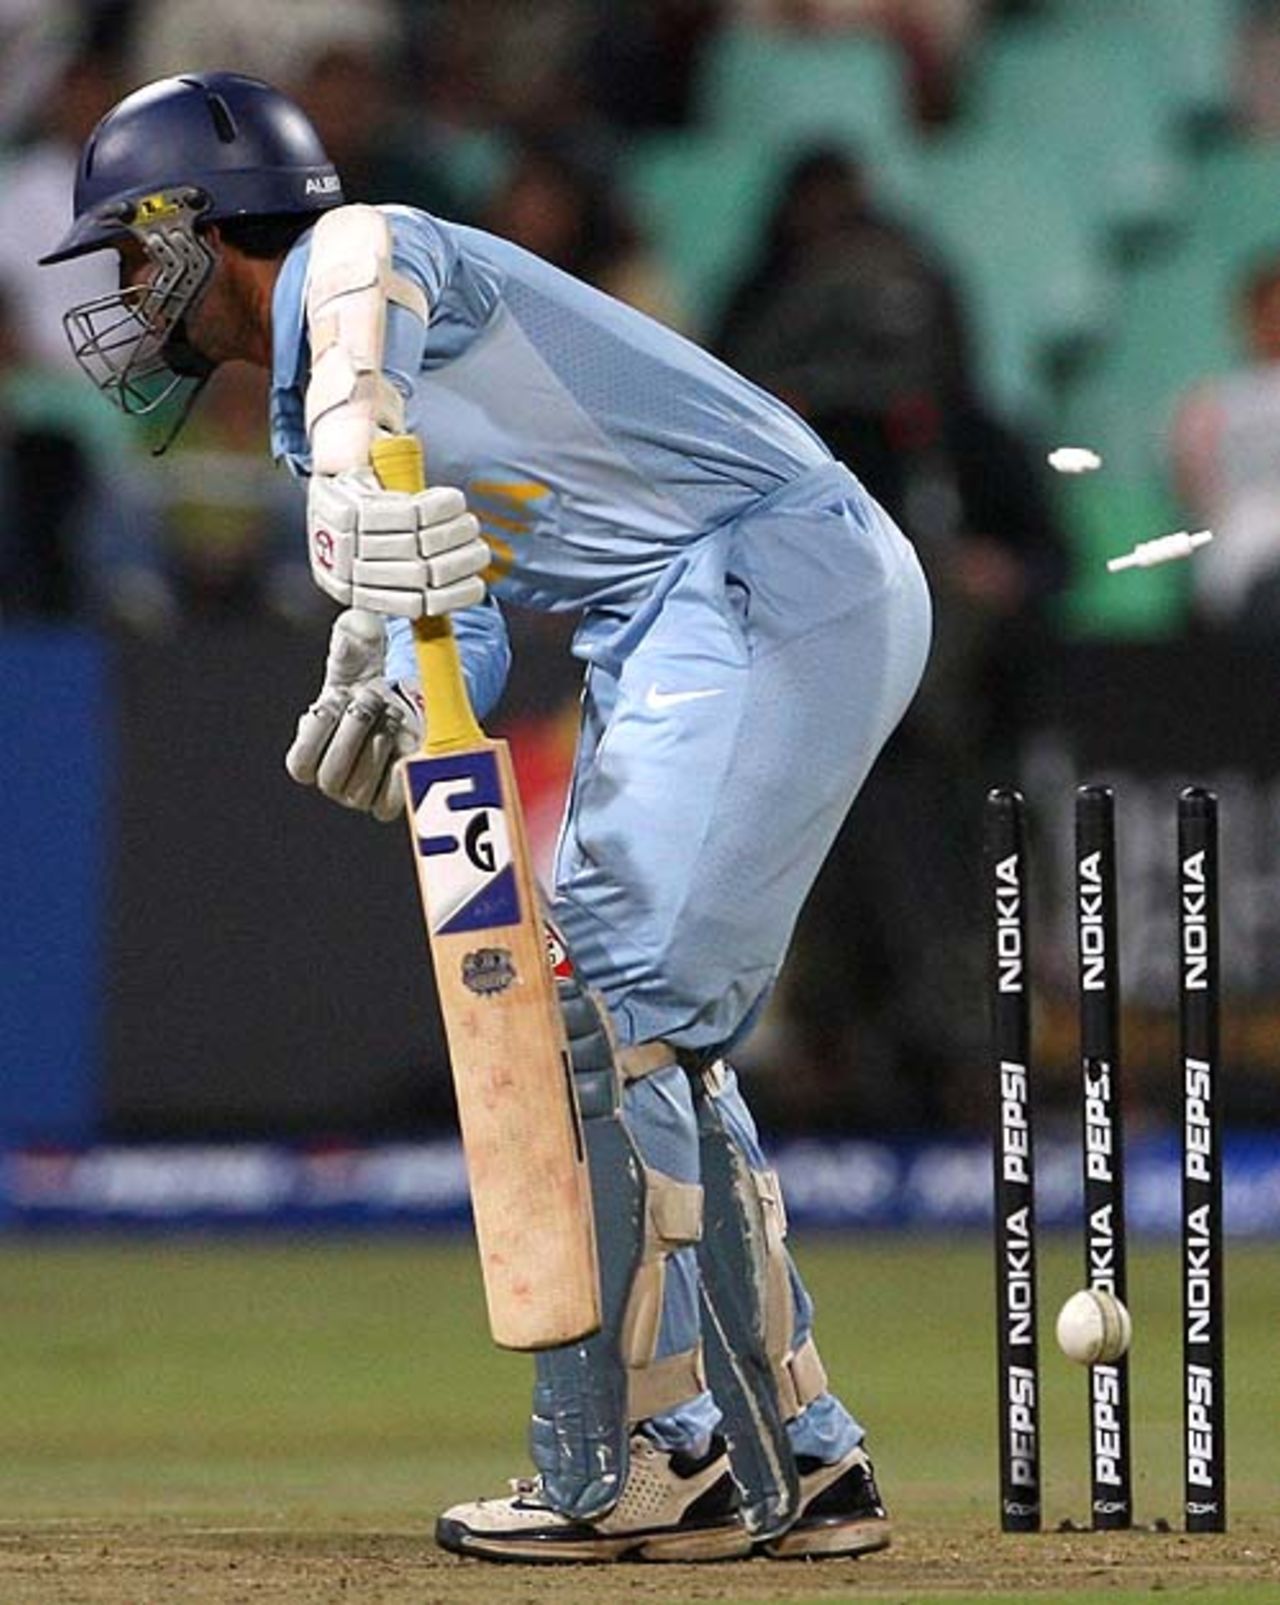 Dinesh Karthik was cleaned up by Mohammad Asif, India v Pakistan, Group D, ICC World Twenty20, Durban, September 14, 2007 